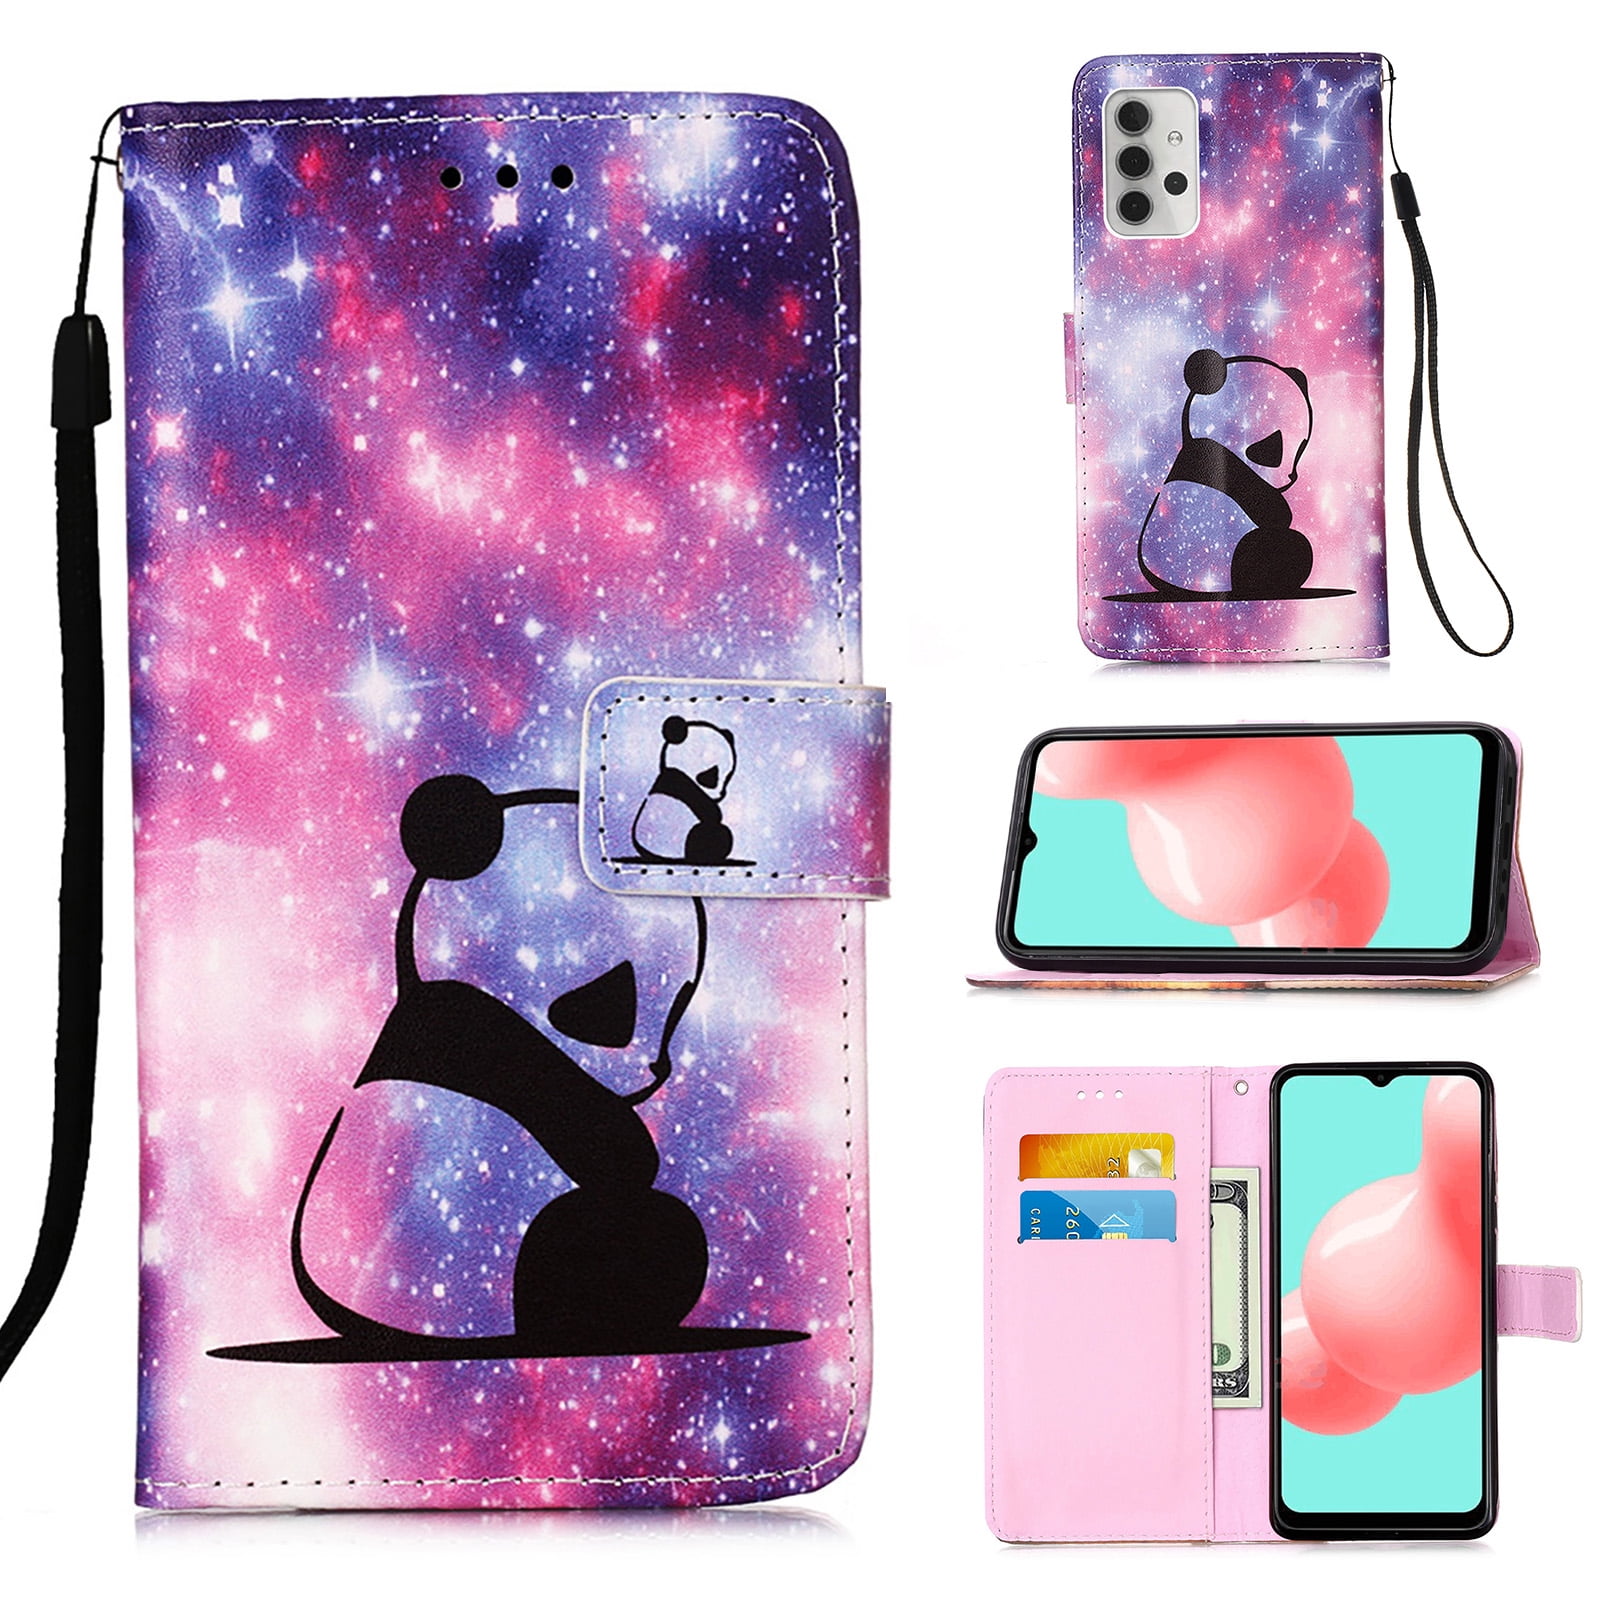 Cute Playing Penguin Leather Flip Phone Case Wallet Cover with Card Slot Holder Kickstand For Samsung Galaxy A32 5G 2021 BCOV Galaxy A32 5G Case